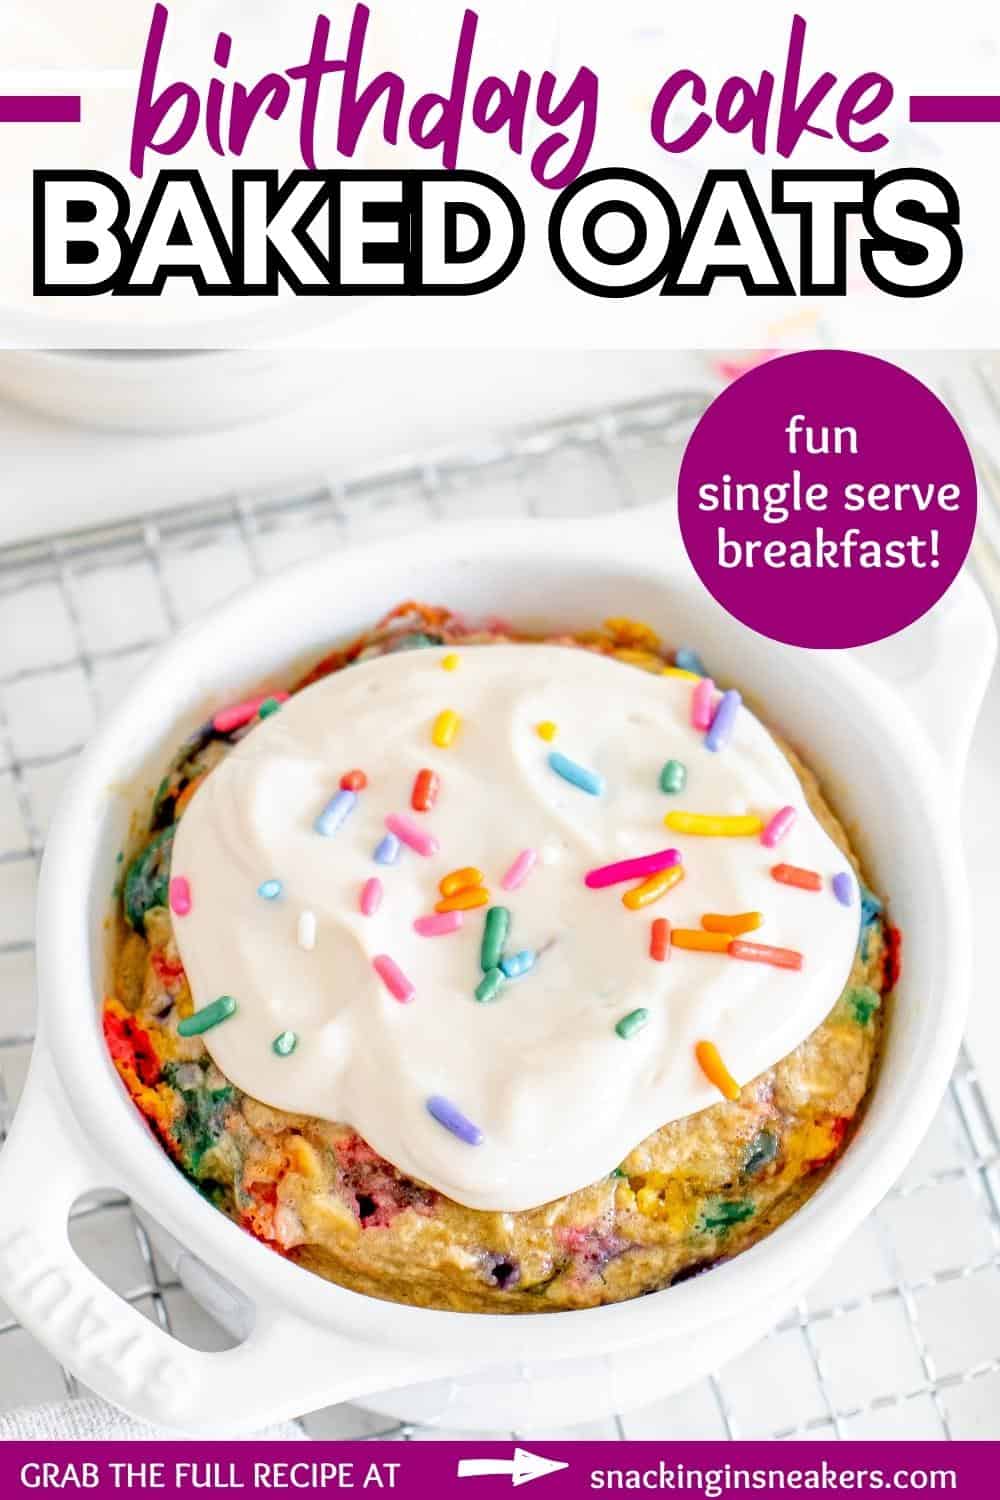 A ceramic dish with birthday cake baked oats topped with a greek yogurt frosting and sprinkles, with a text overlay with the name of the recipe.